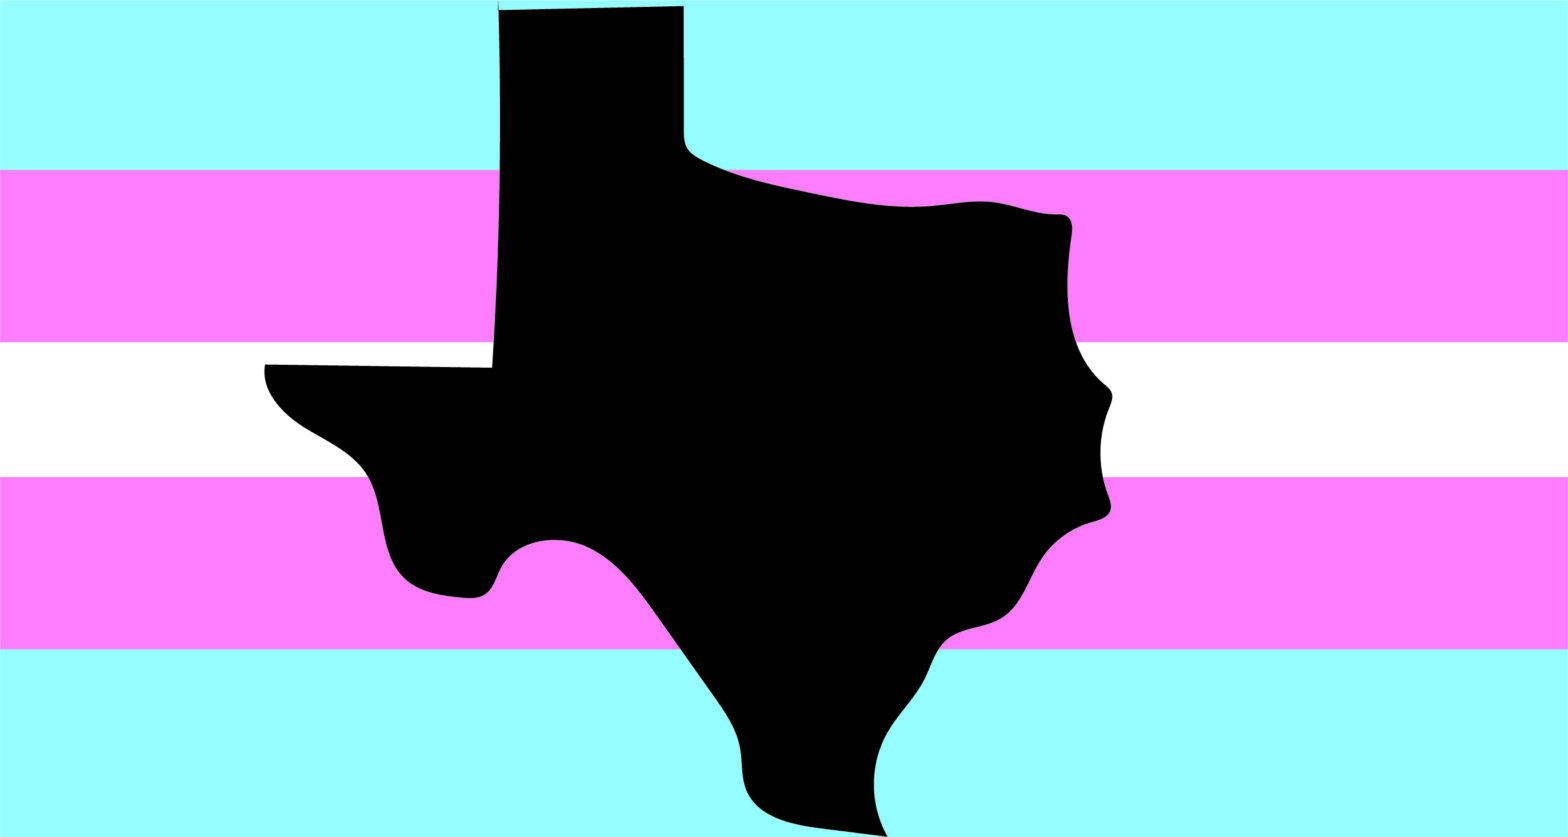 An illustration of the state of Texas over the transgender flag.